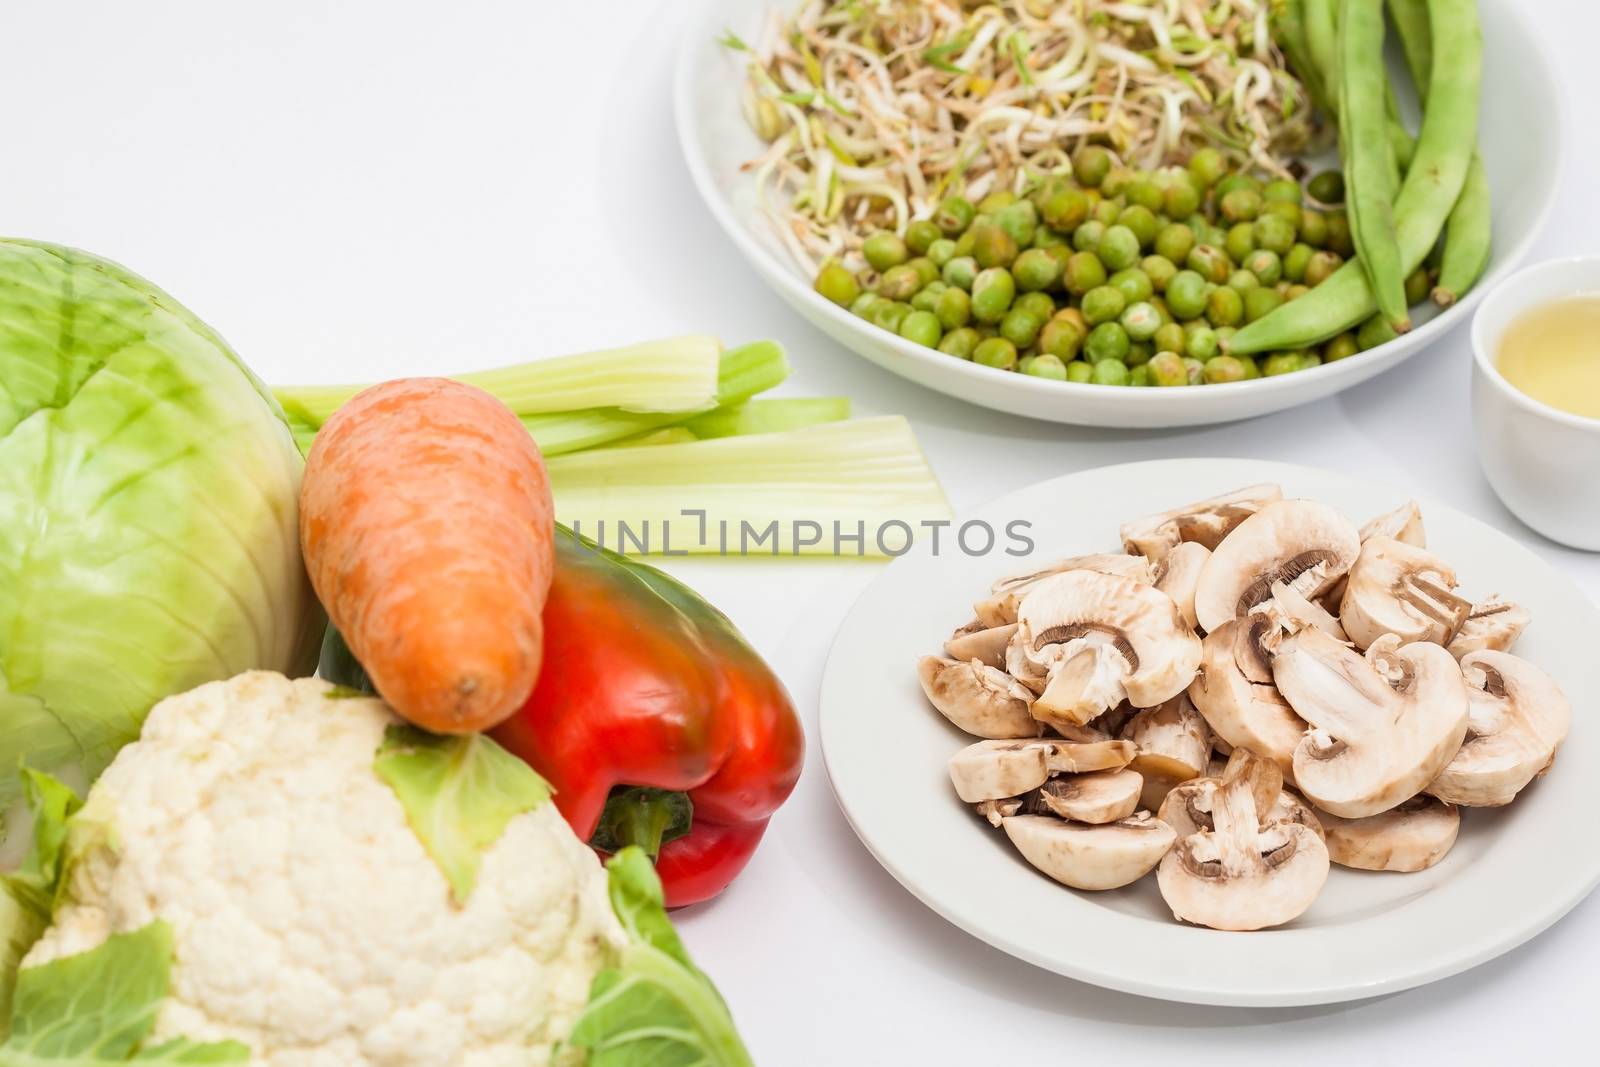 Sauteed vegetables with chicken, pork, jam and shrimps preparation: Raw ingredients to prepare sauteed vegetables